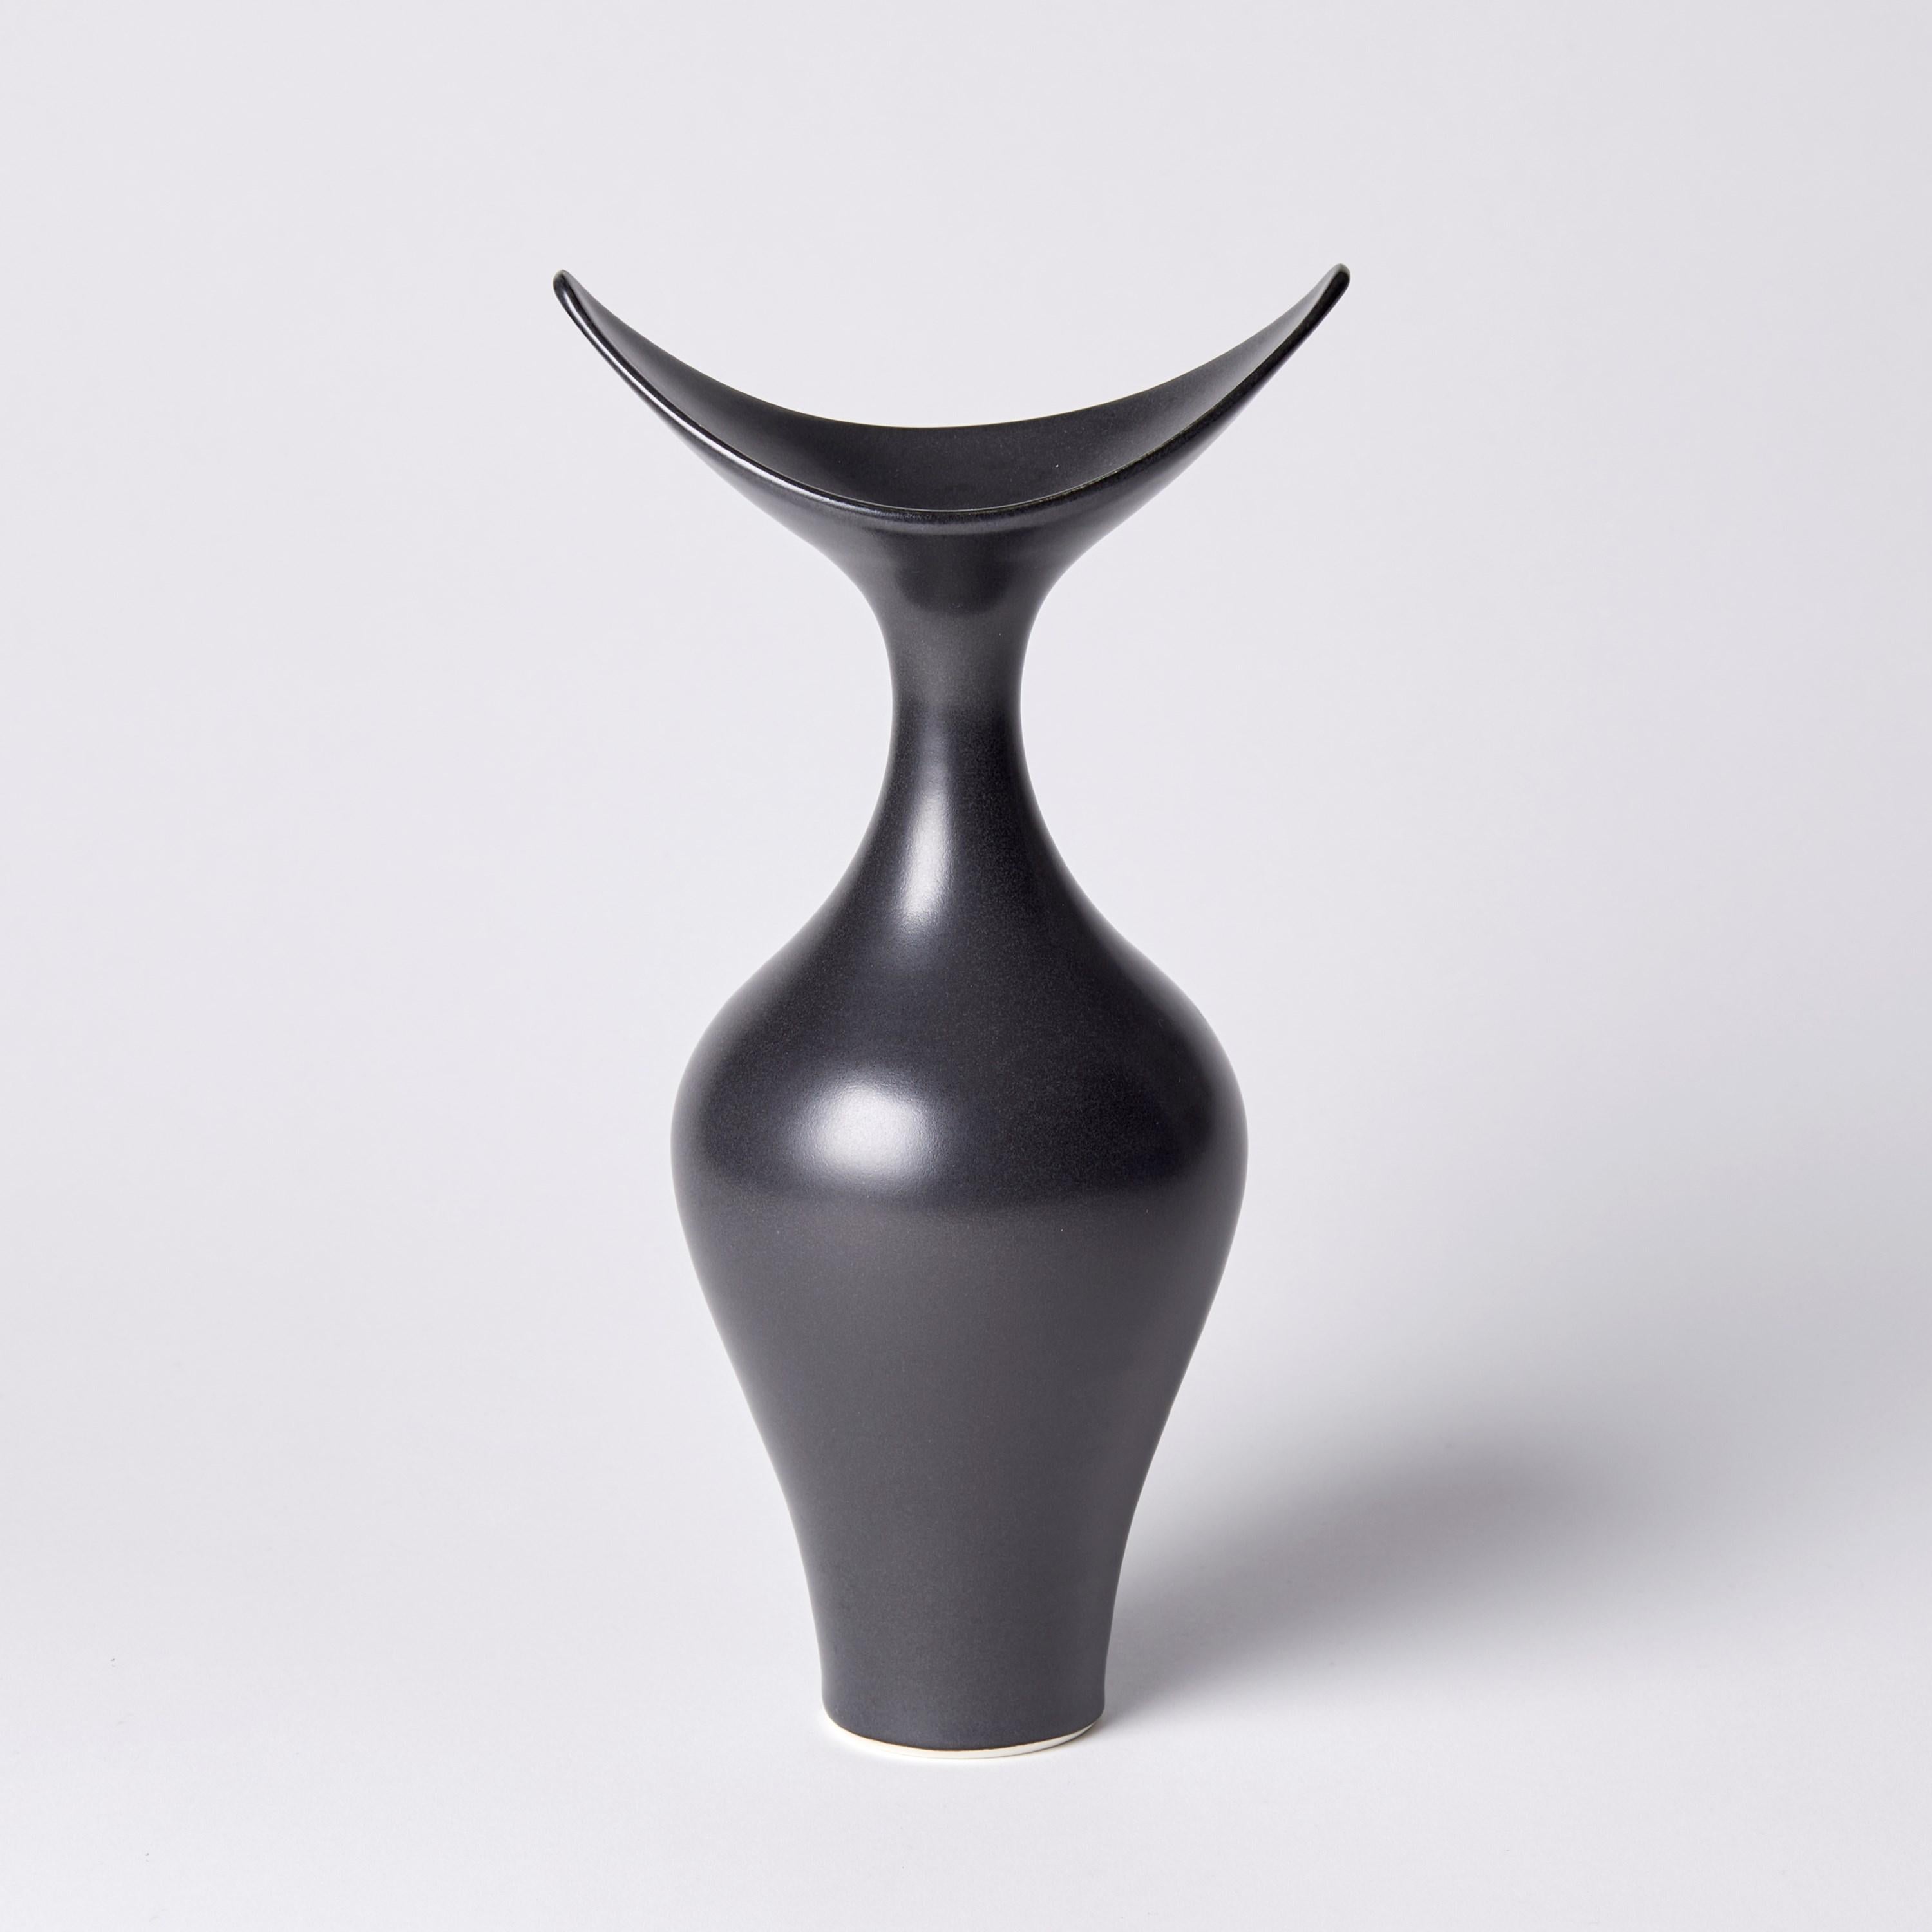 ‘Boat Necked Vase I’ is a unique porcelain sculptural vessel by the British artist, Vivienne Foley. 

Vivienne Foley is based in Gloucestershire where she produces exquisite ceramic sculpture. Although in essence they are often functional pieces